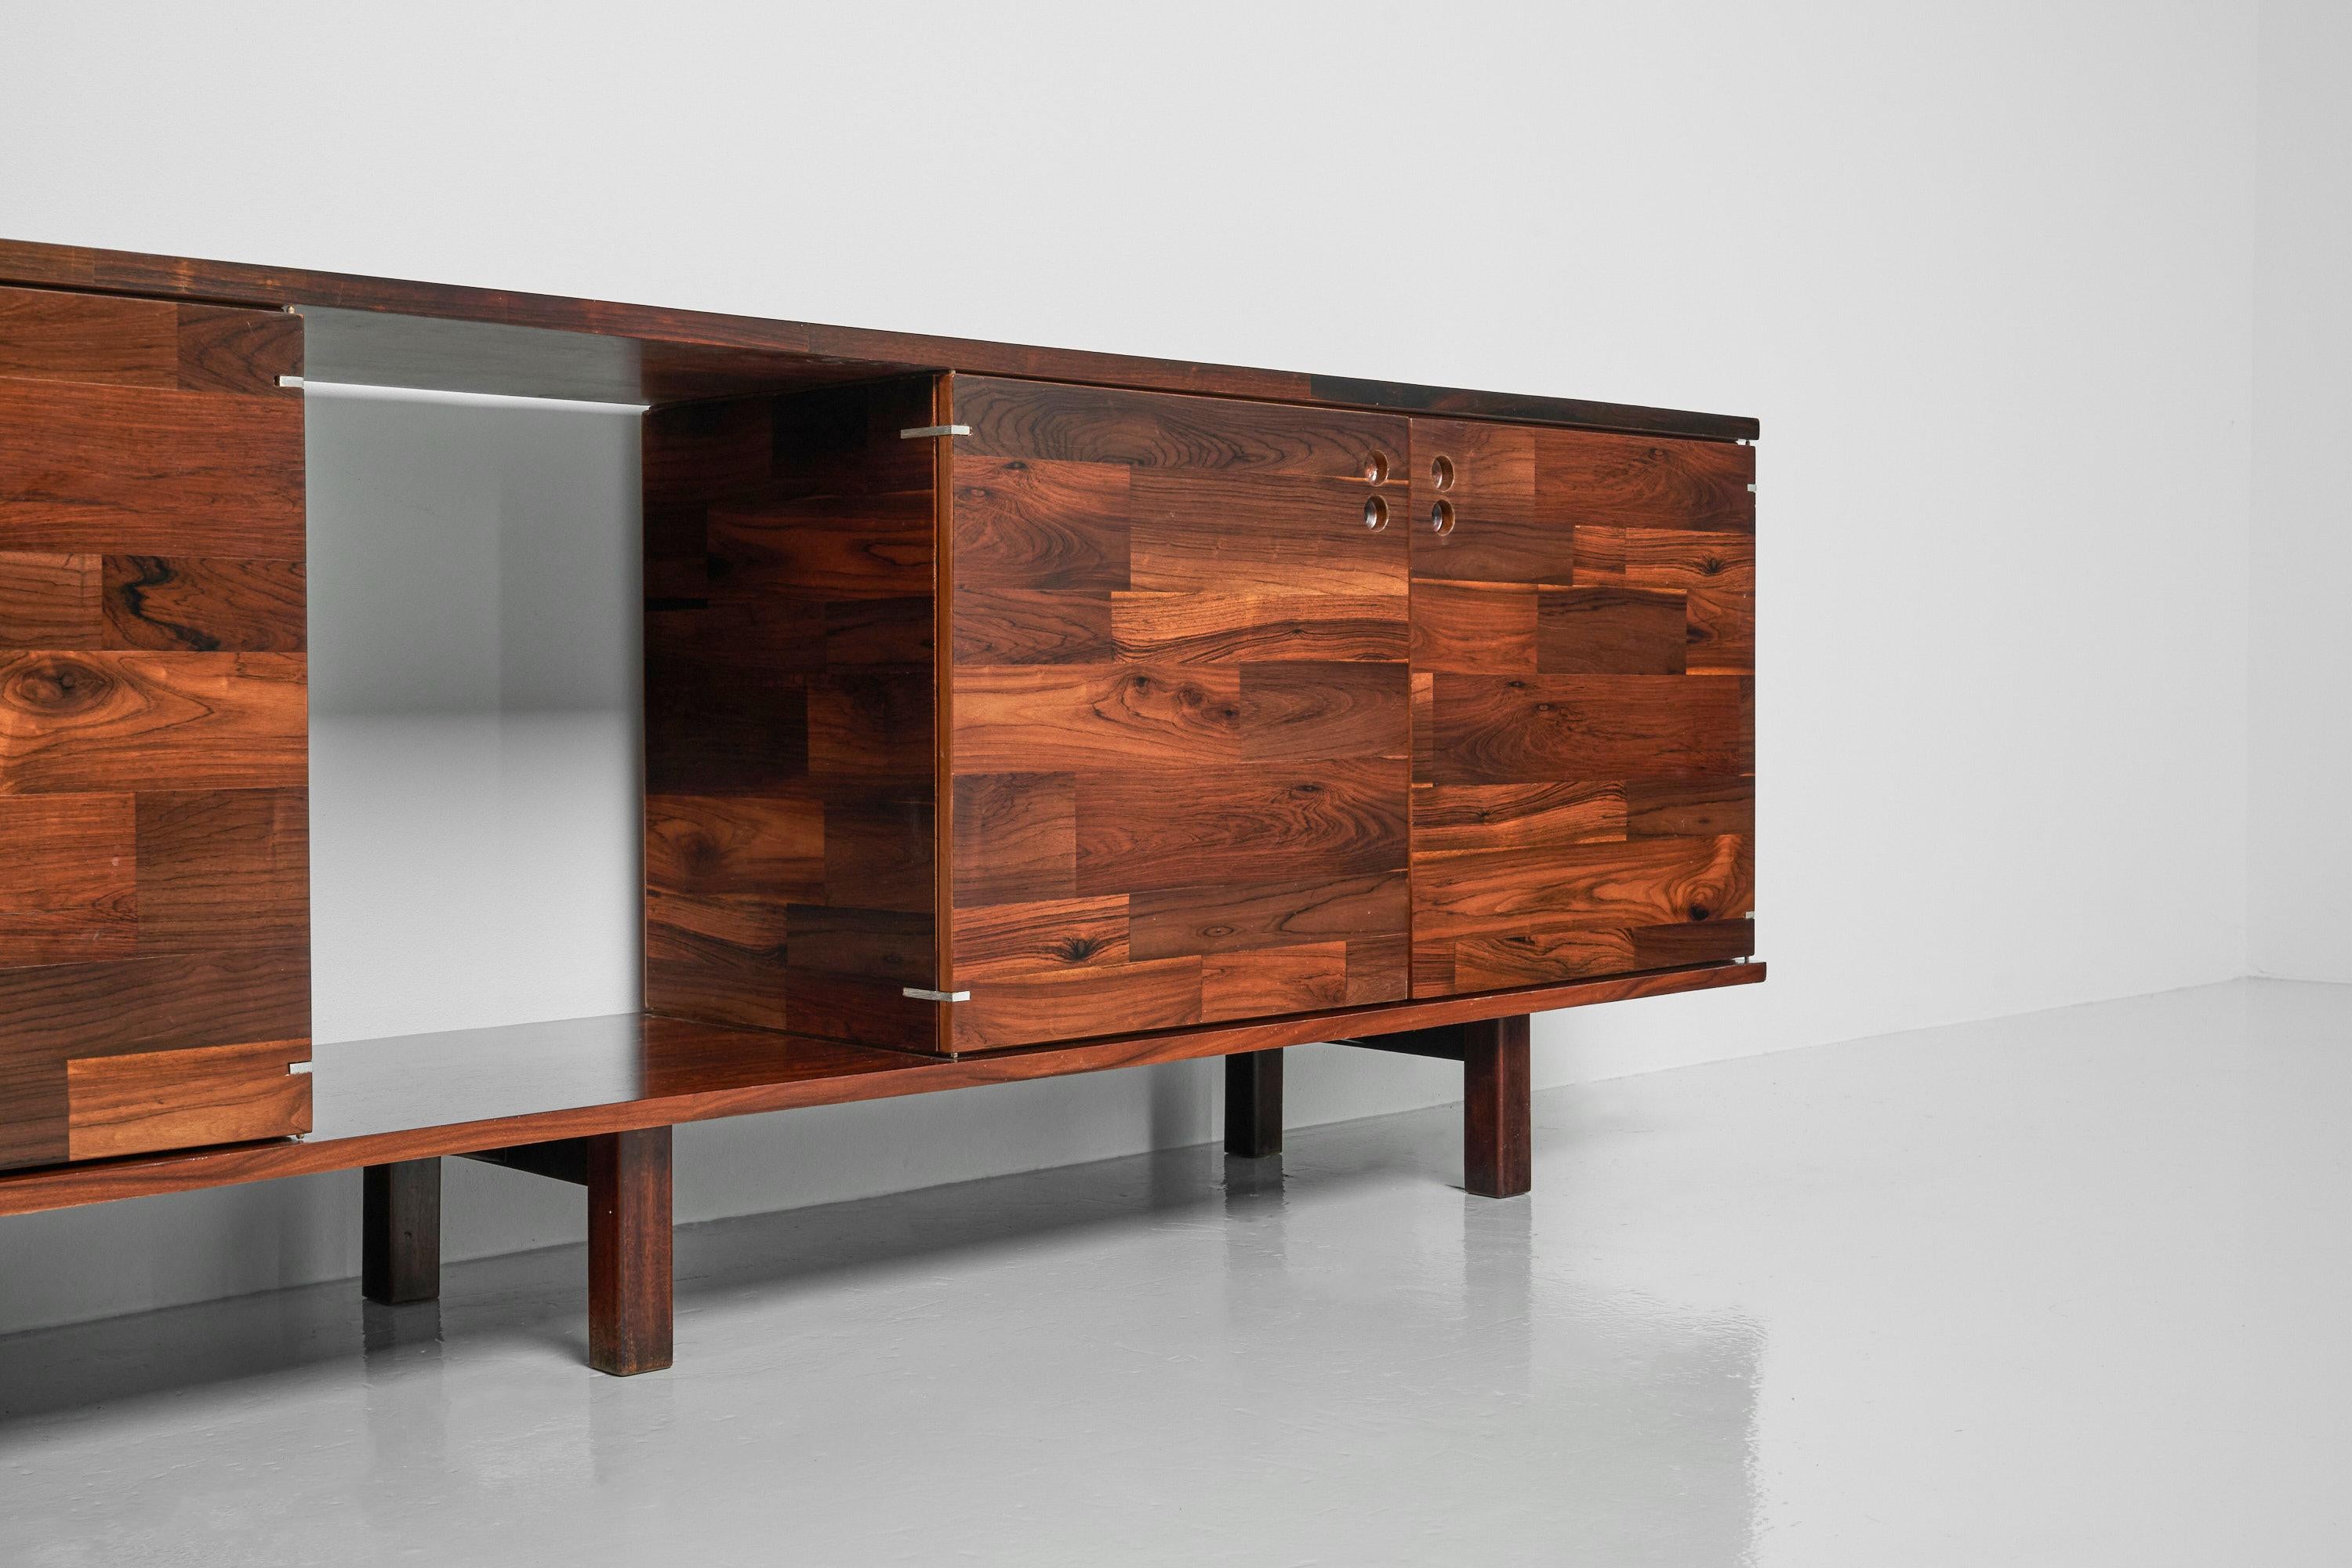 Beautiful large sized but sophisticated sideboard from the componivel series designed by Jorge Zalszupin and manufactured by his own company L'Atelier, Brazil 1959. Modular furniture by Jorge is instantly recognizable, as he was the first one to